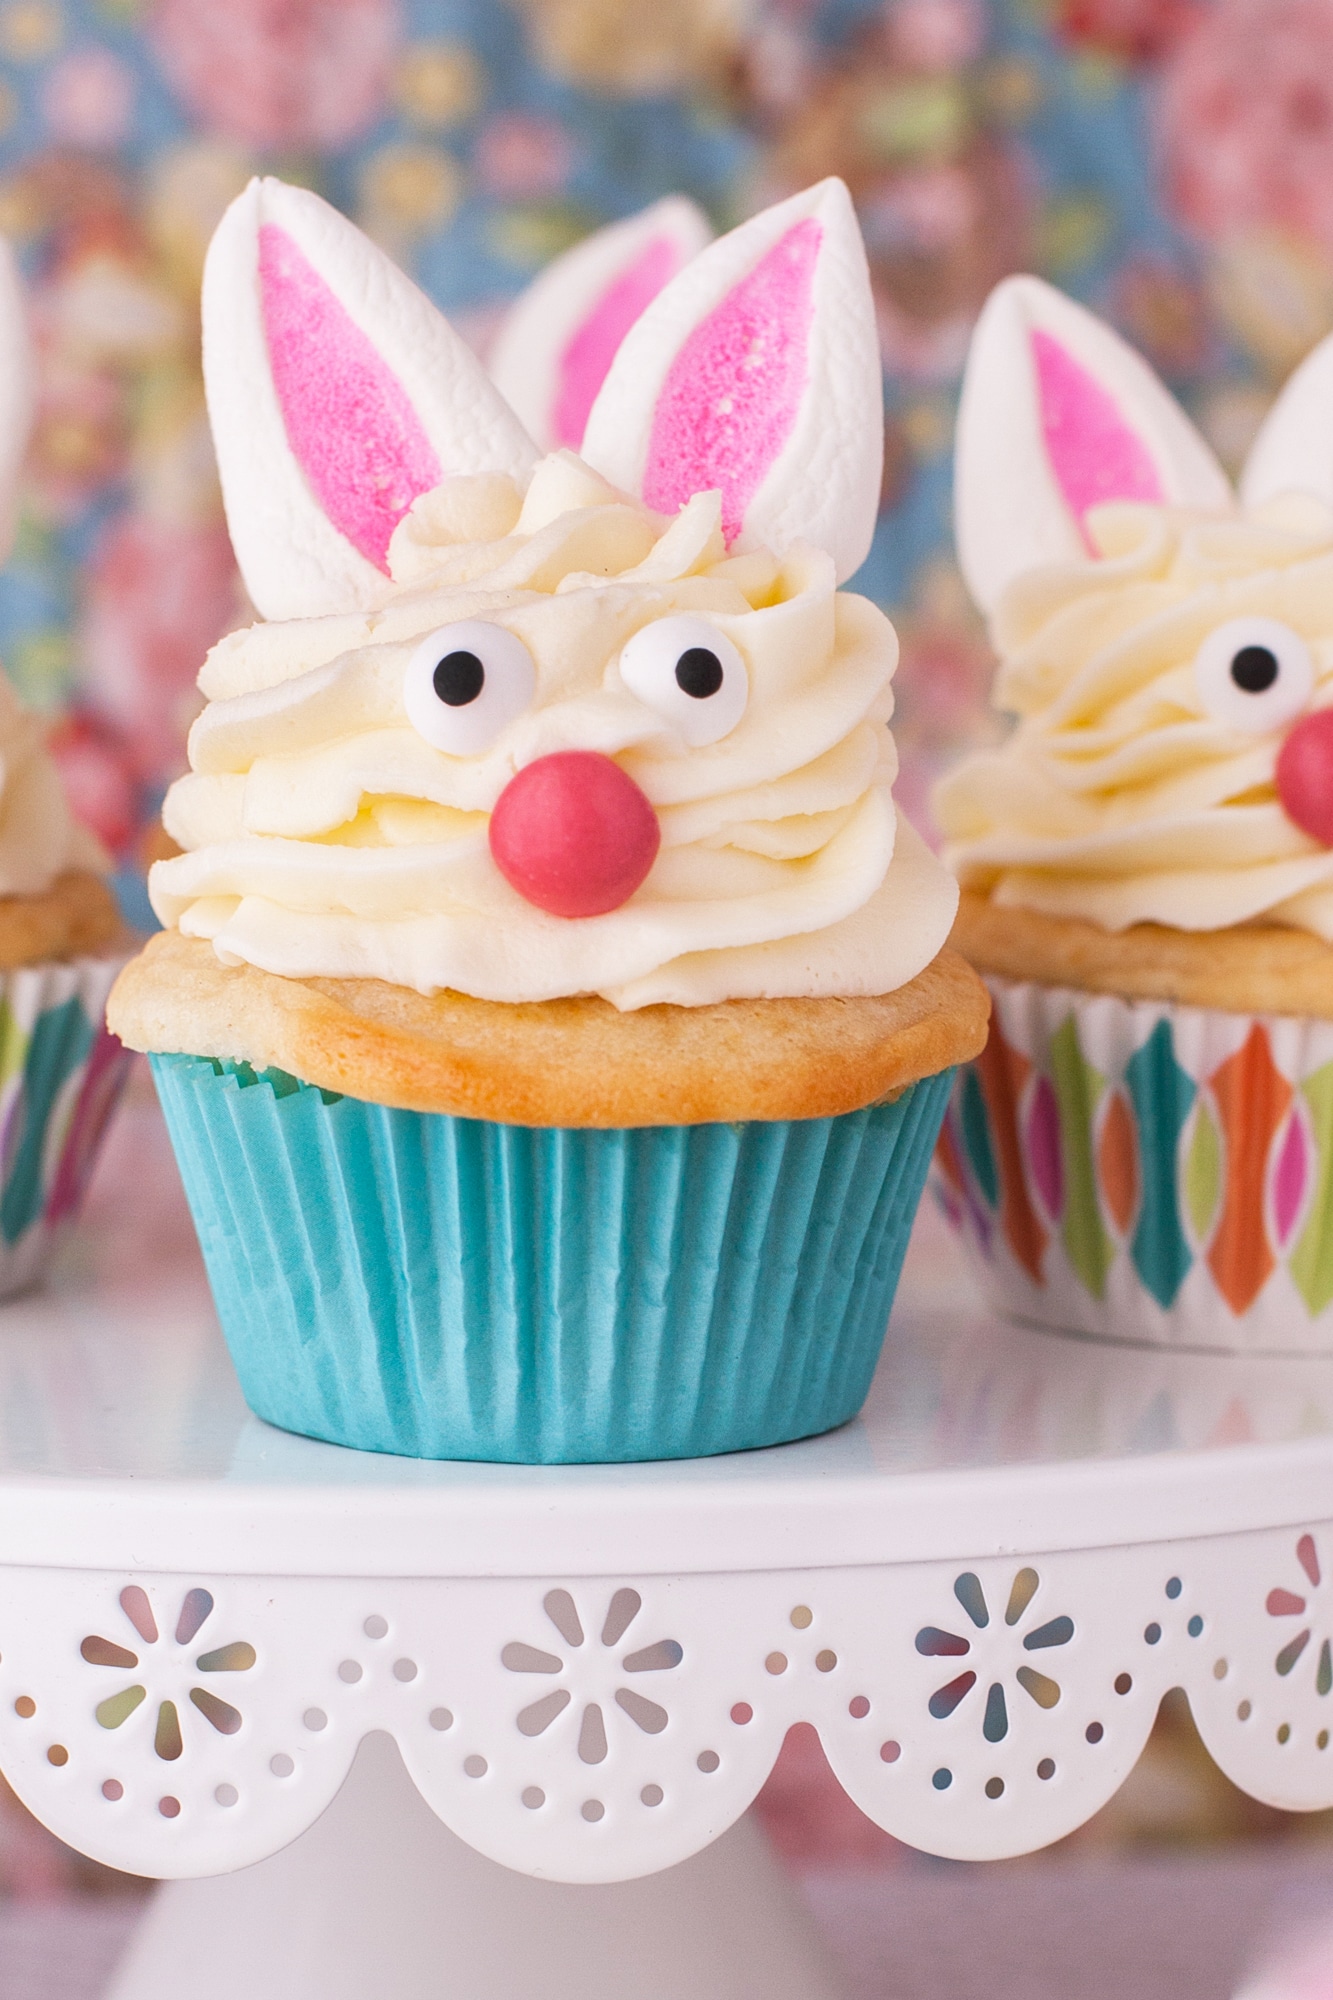 Marshmallow Bunny Cupcakes for Easter - Eating Richly